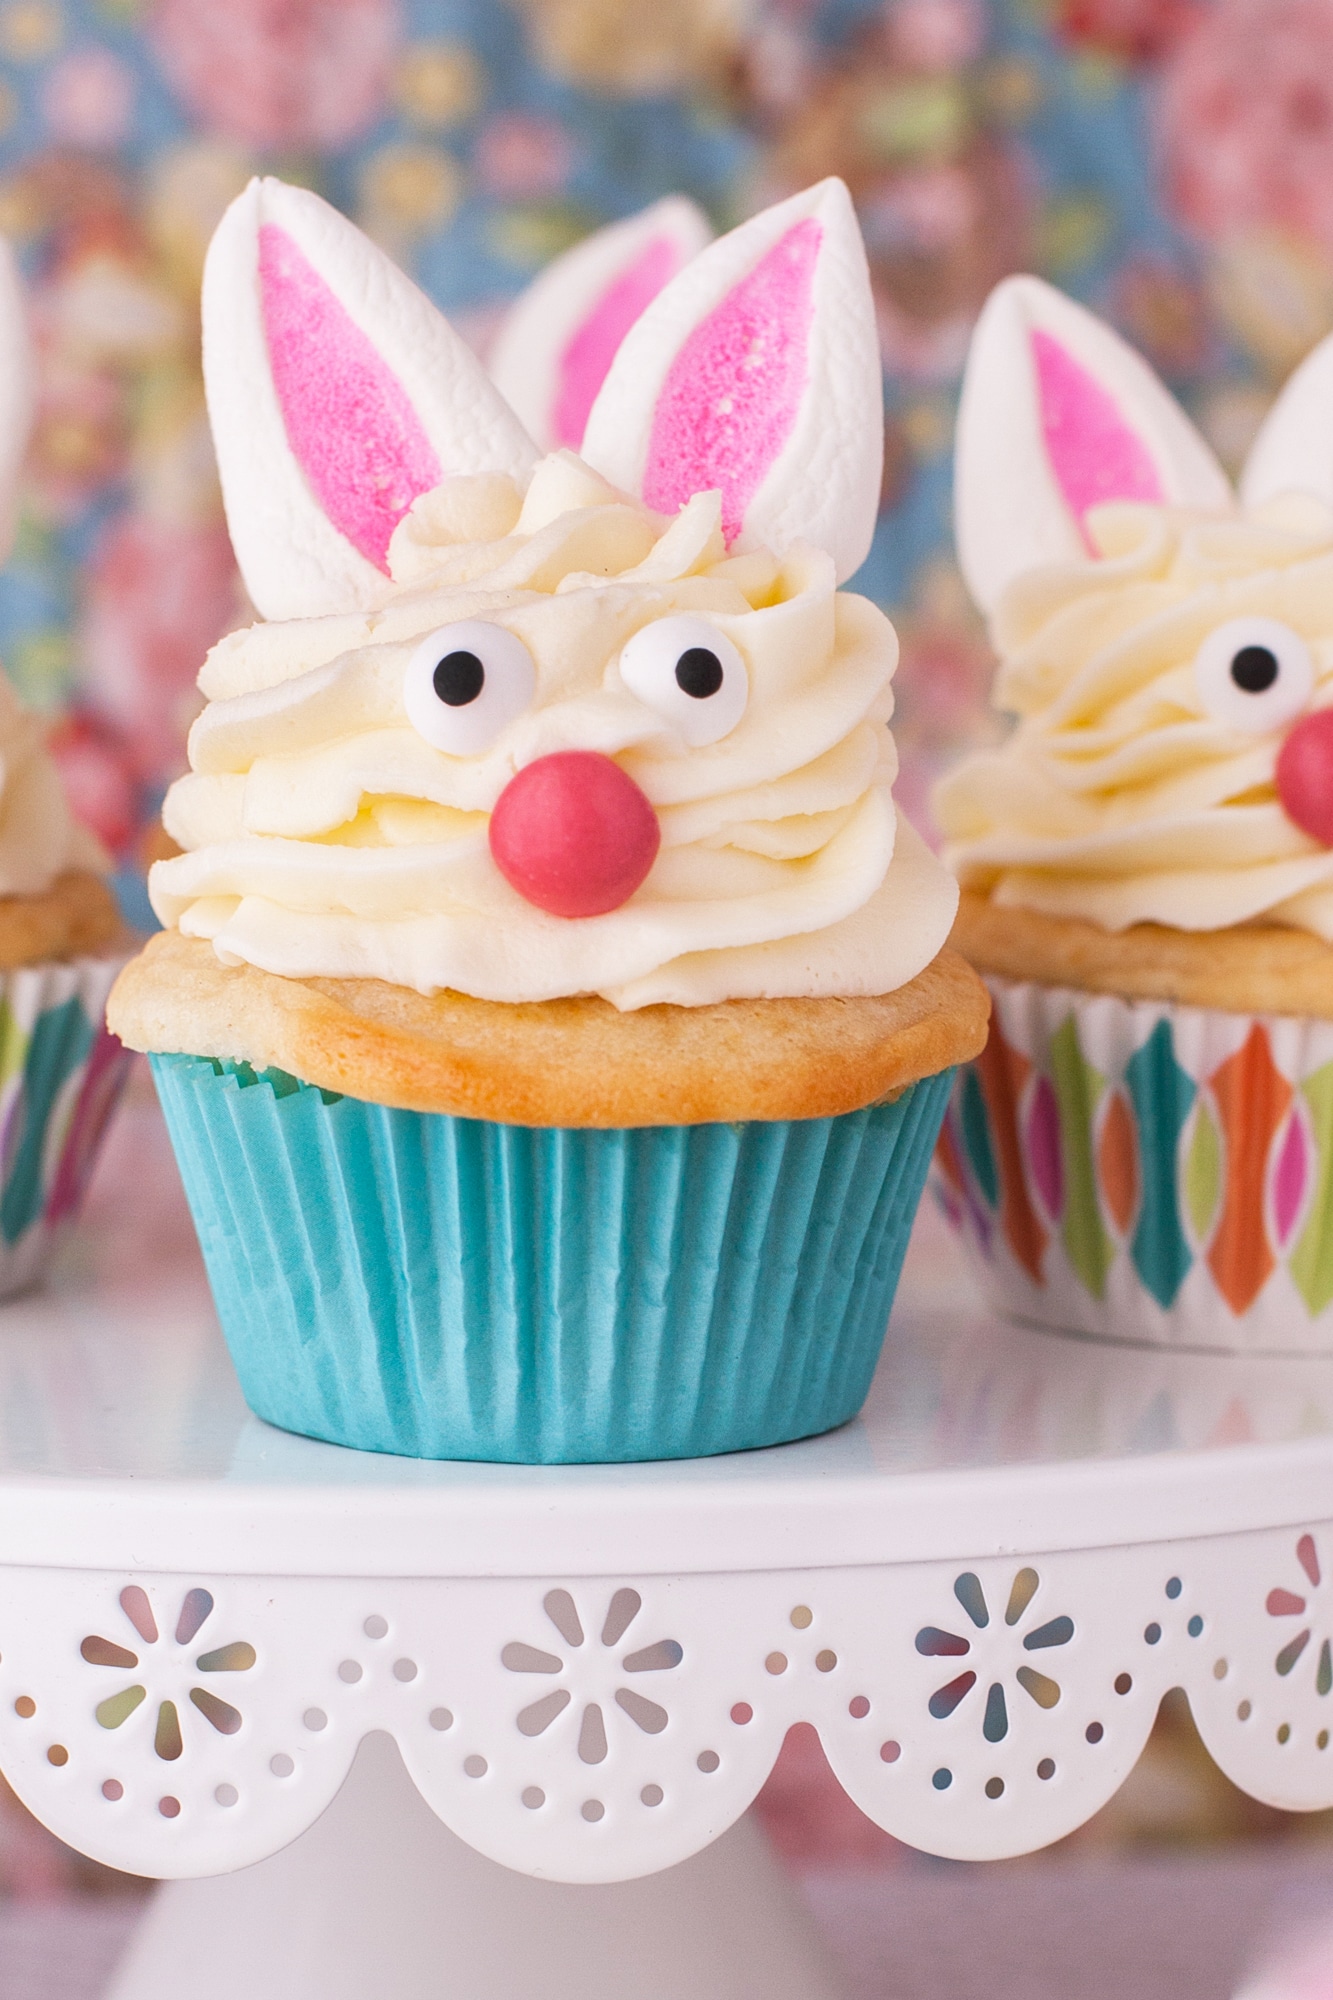 Marshmallow Bunny Cupcakes for Easter - Eating Richly